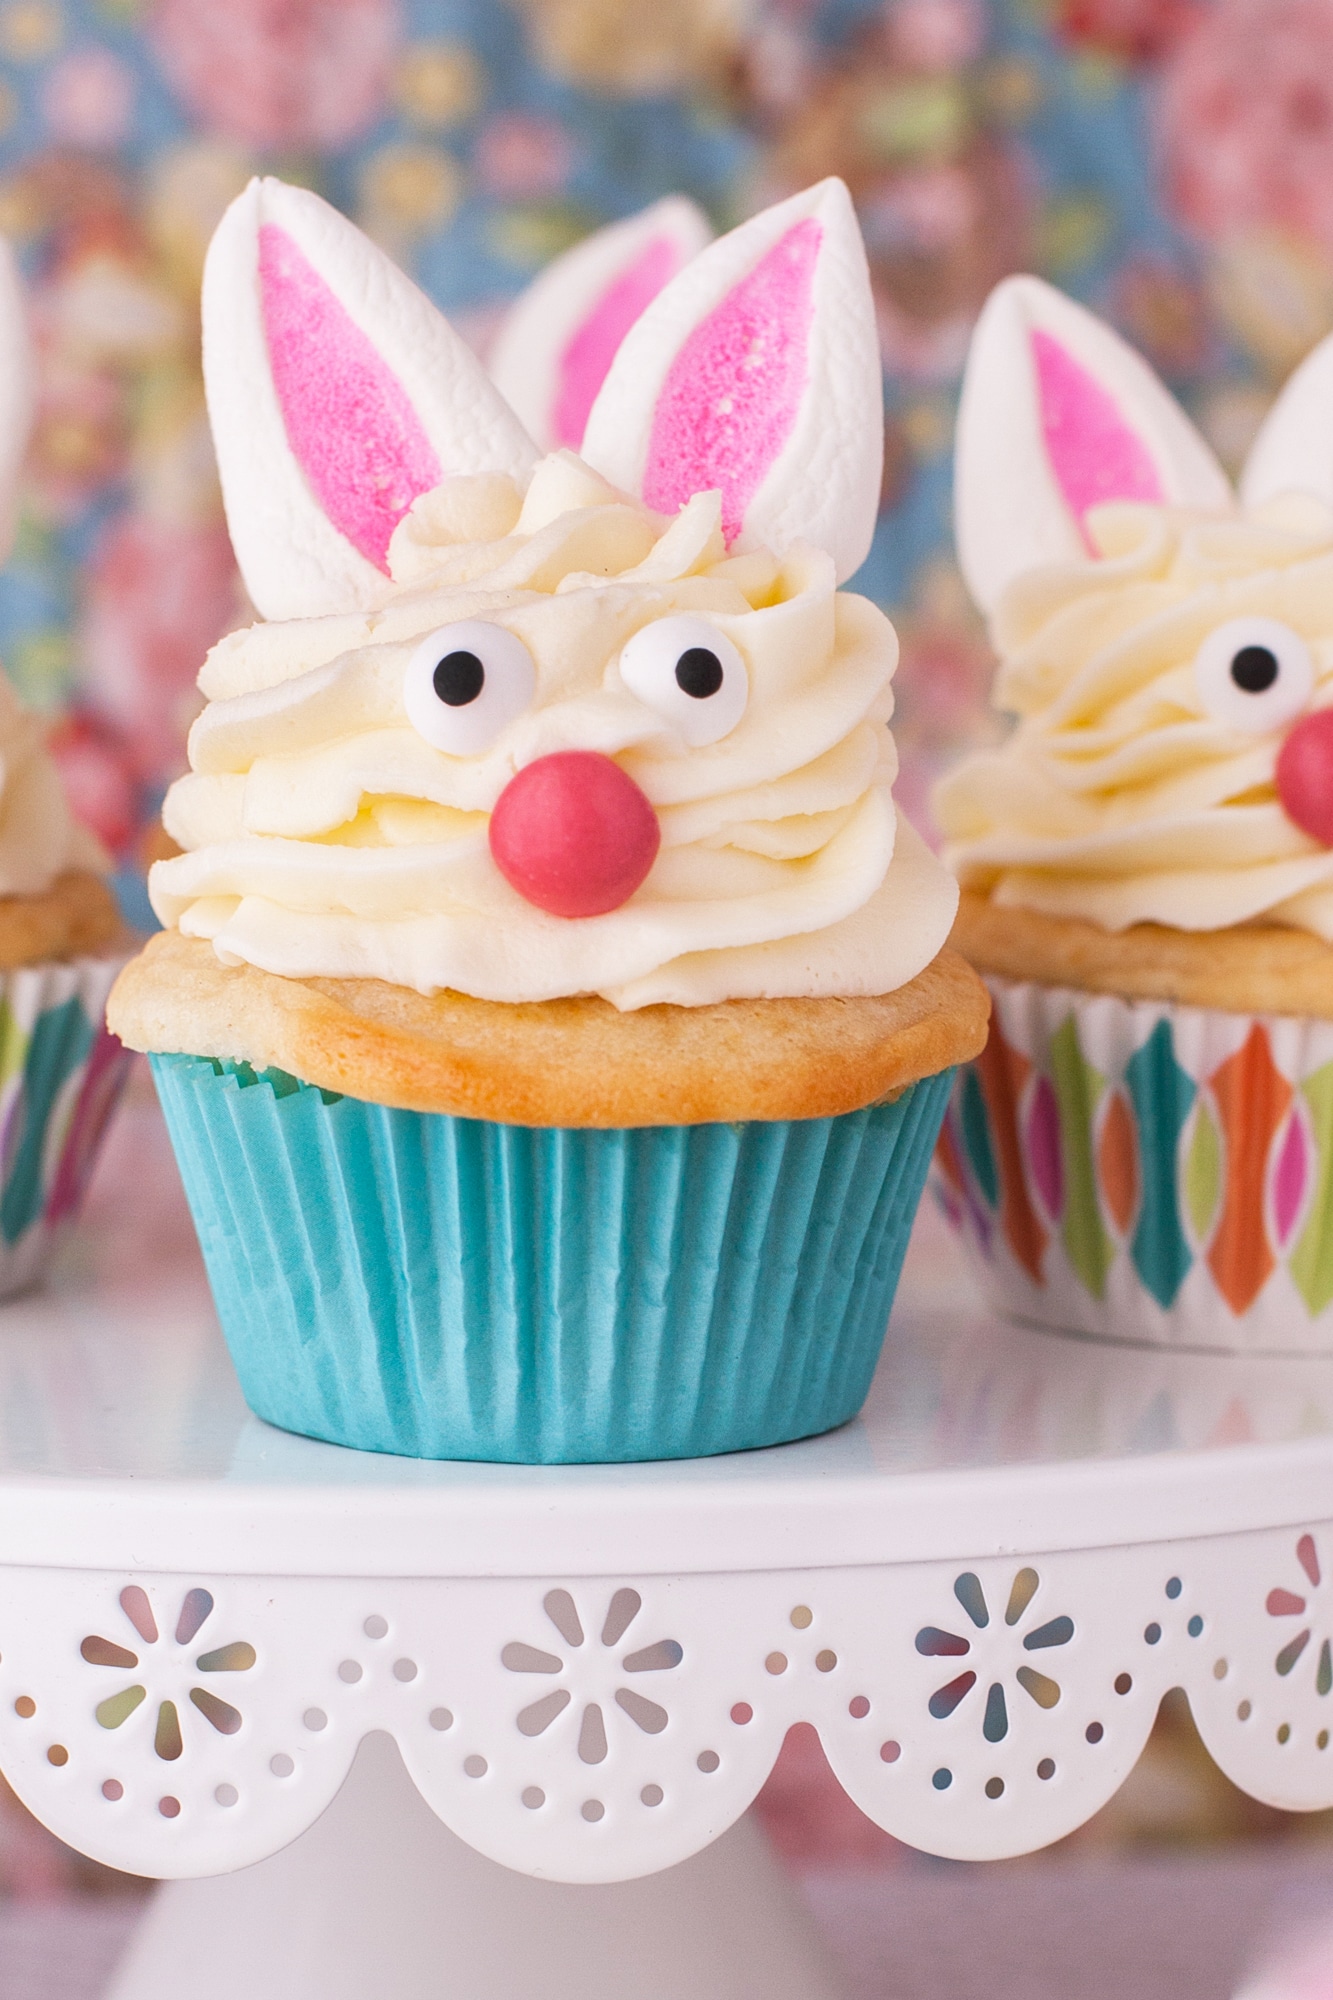 Marshmallow Bunny Cupcakes for Easter - Eating Richly